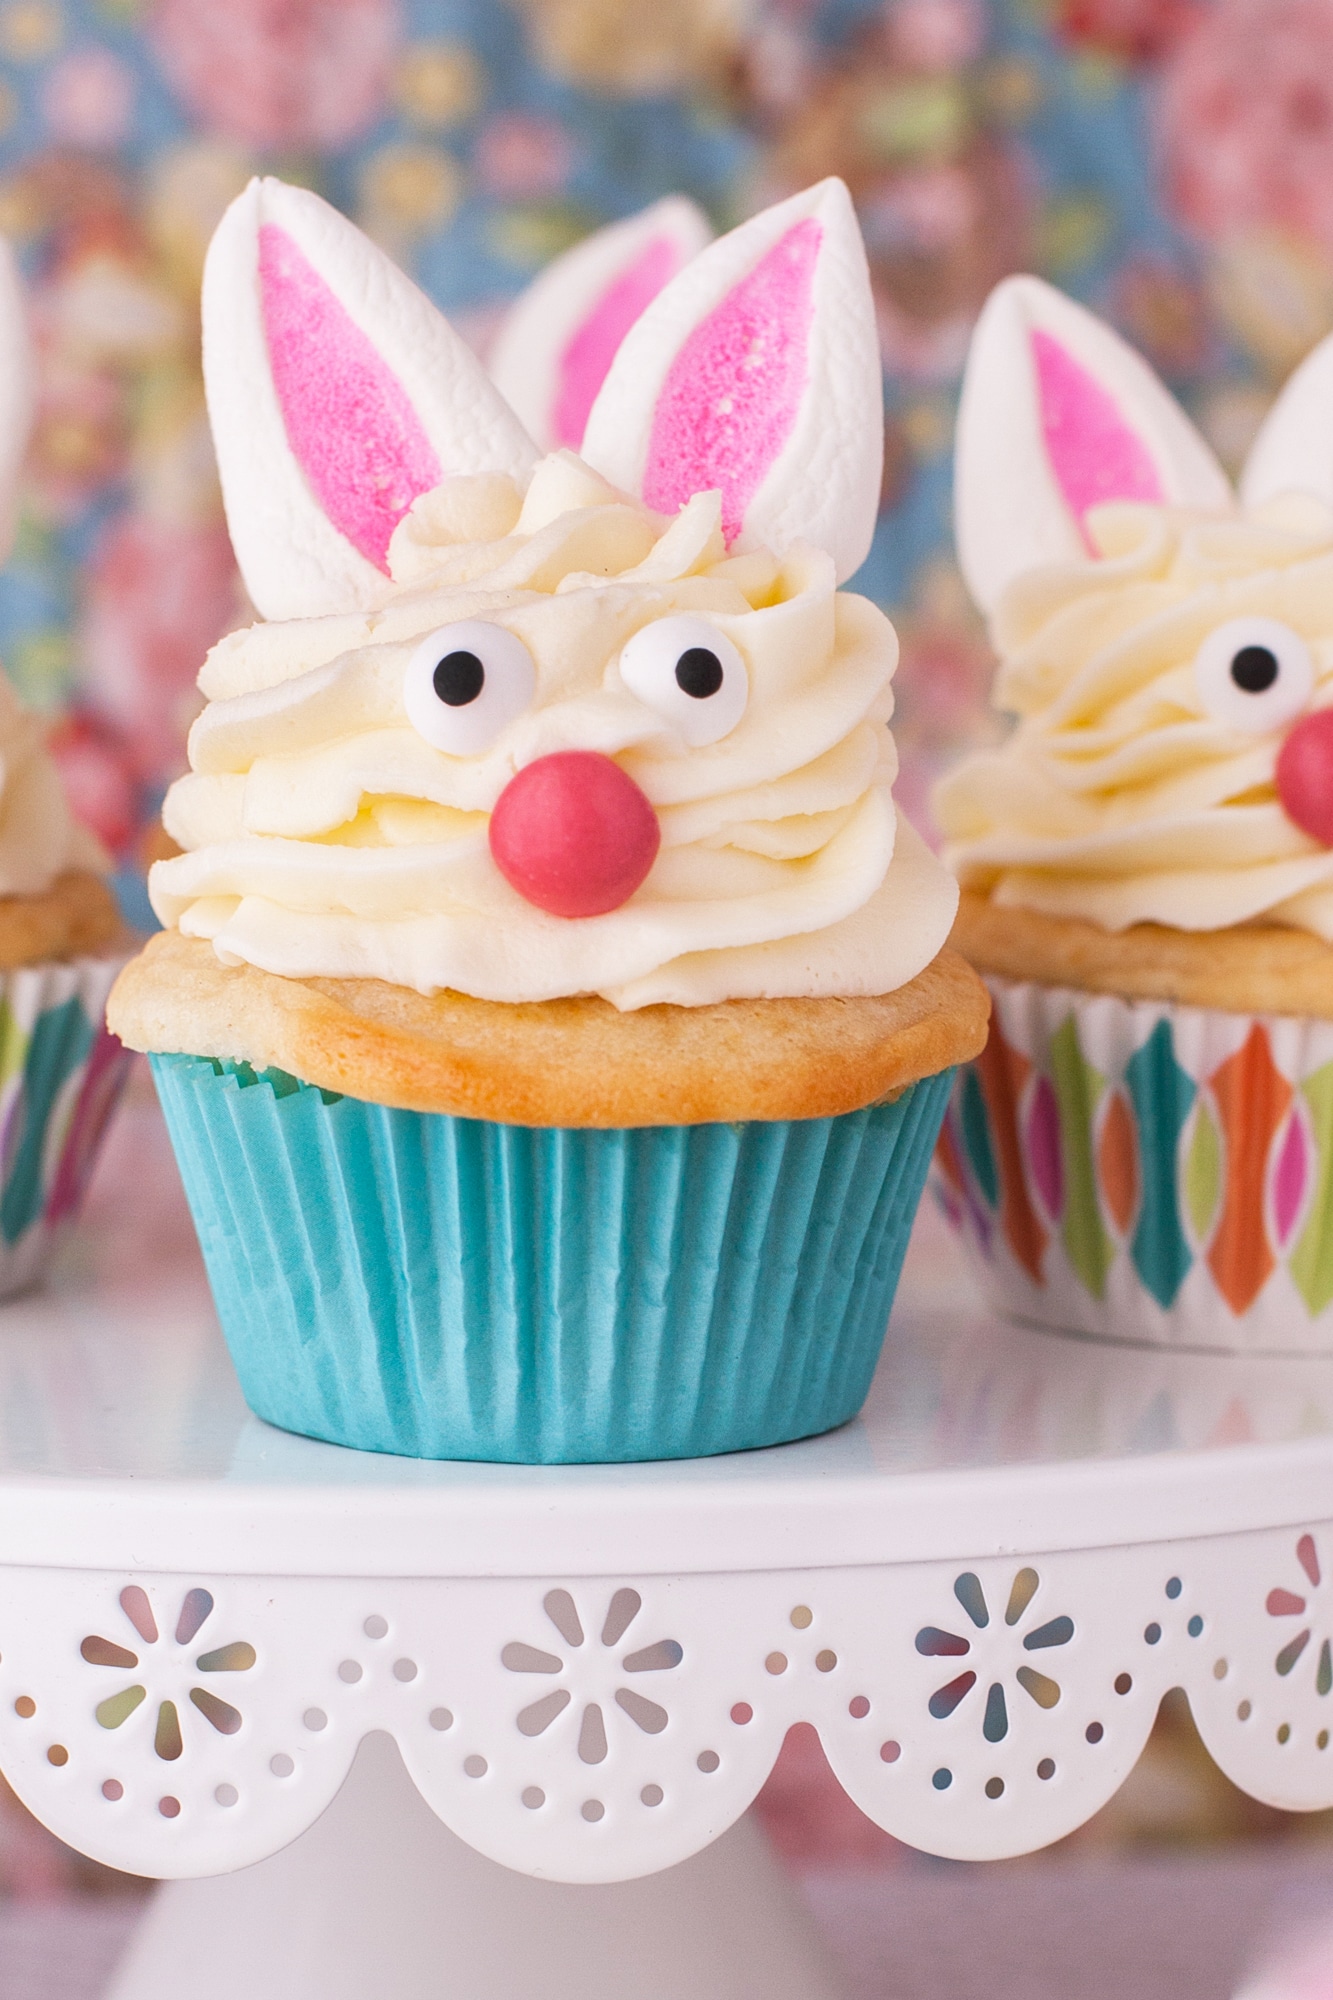 Marshmallow Bunny Cupcakes for Easter - Eating Richly